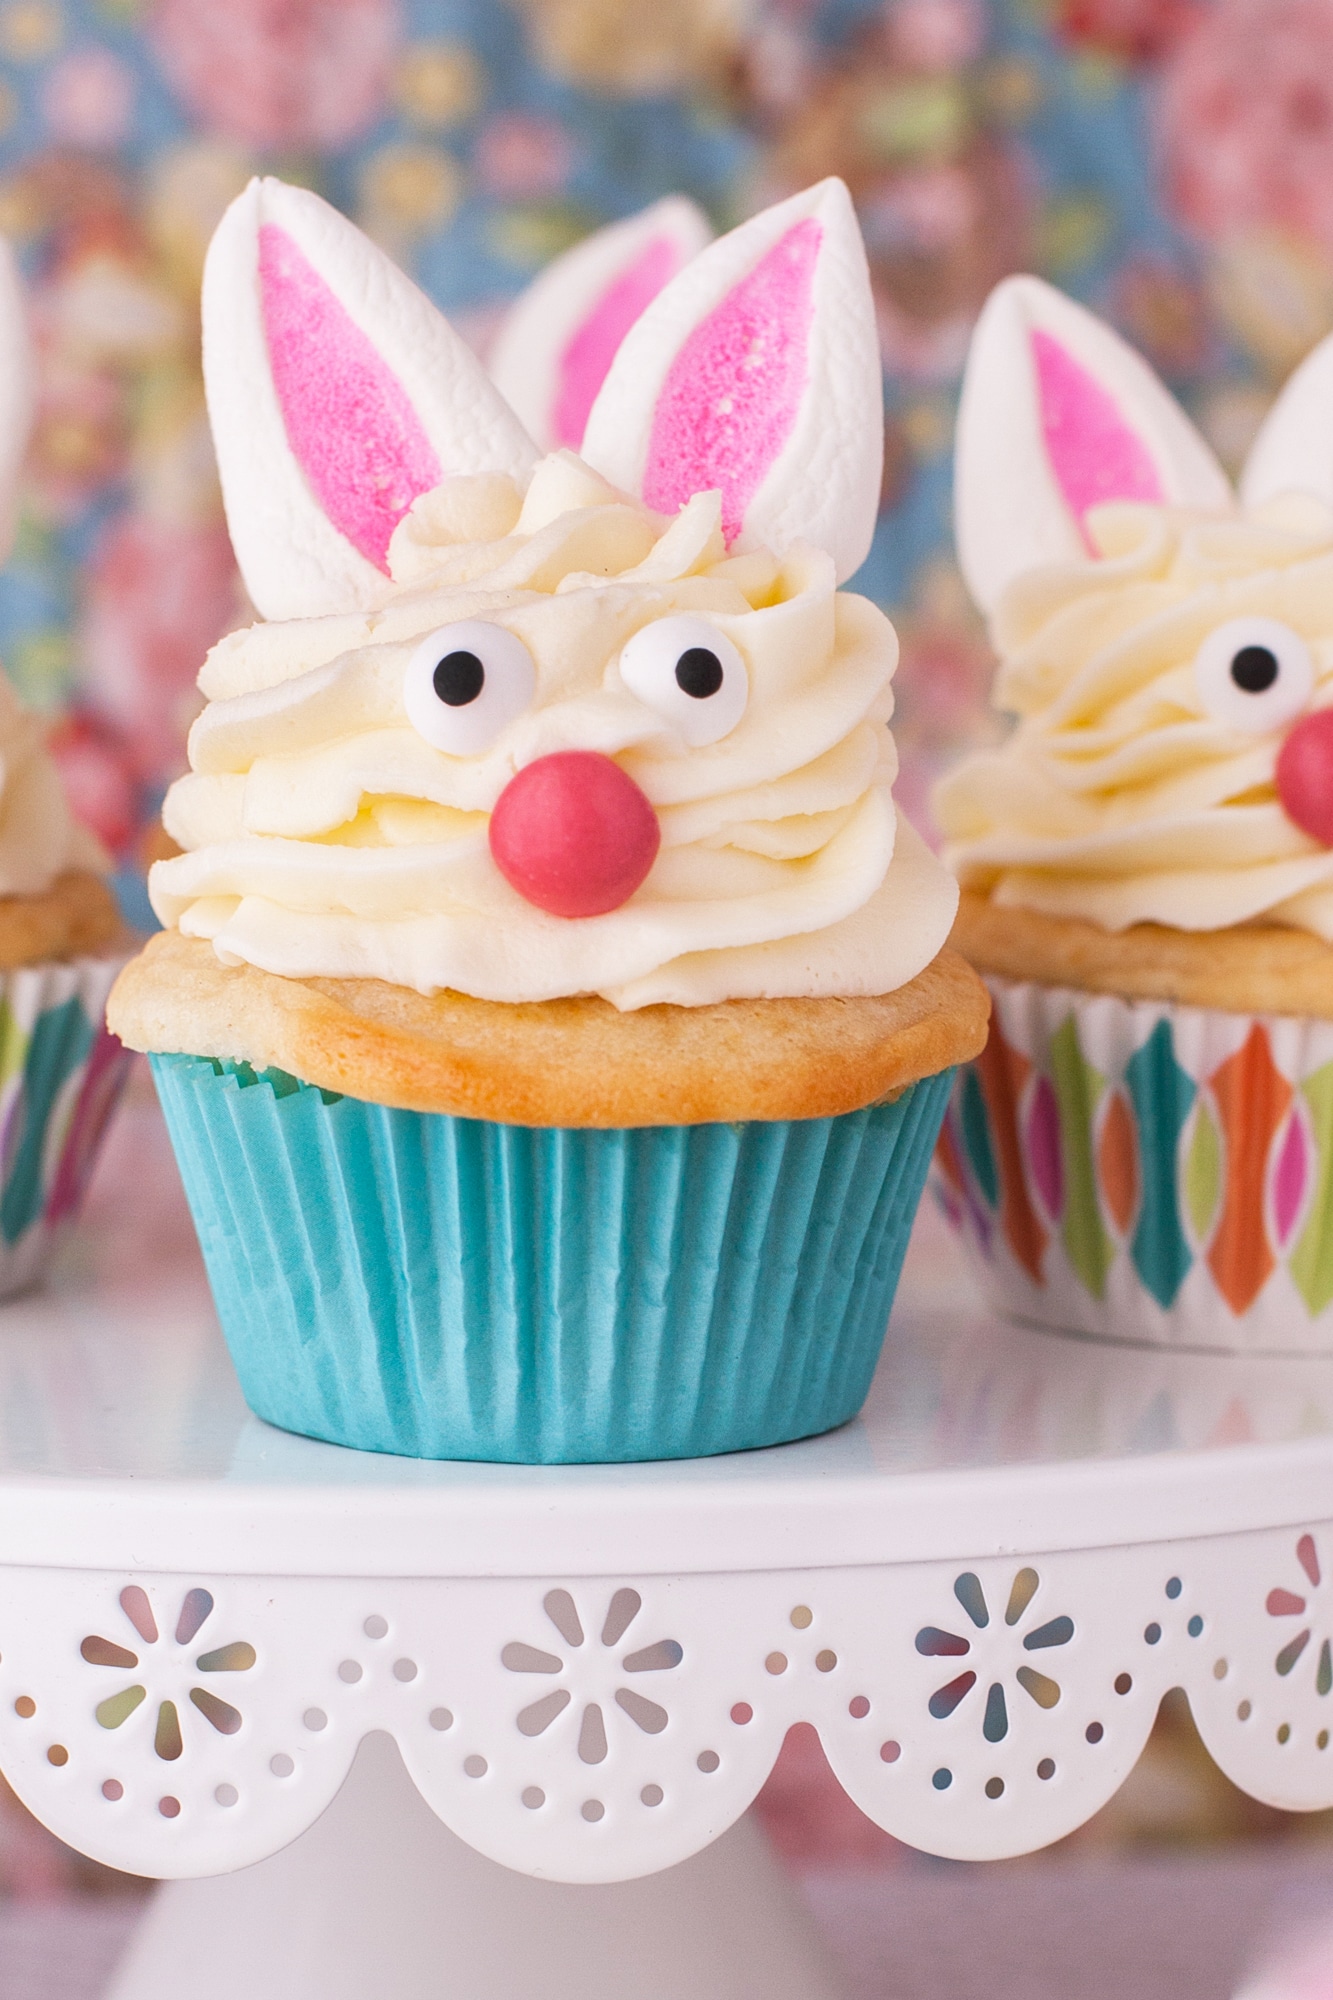 Marshmallow Bunny Cupcakes for Easter - Eating Richly